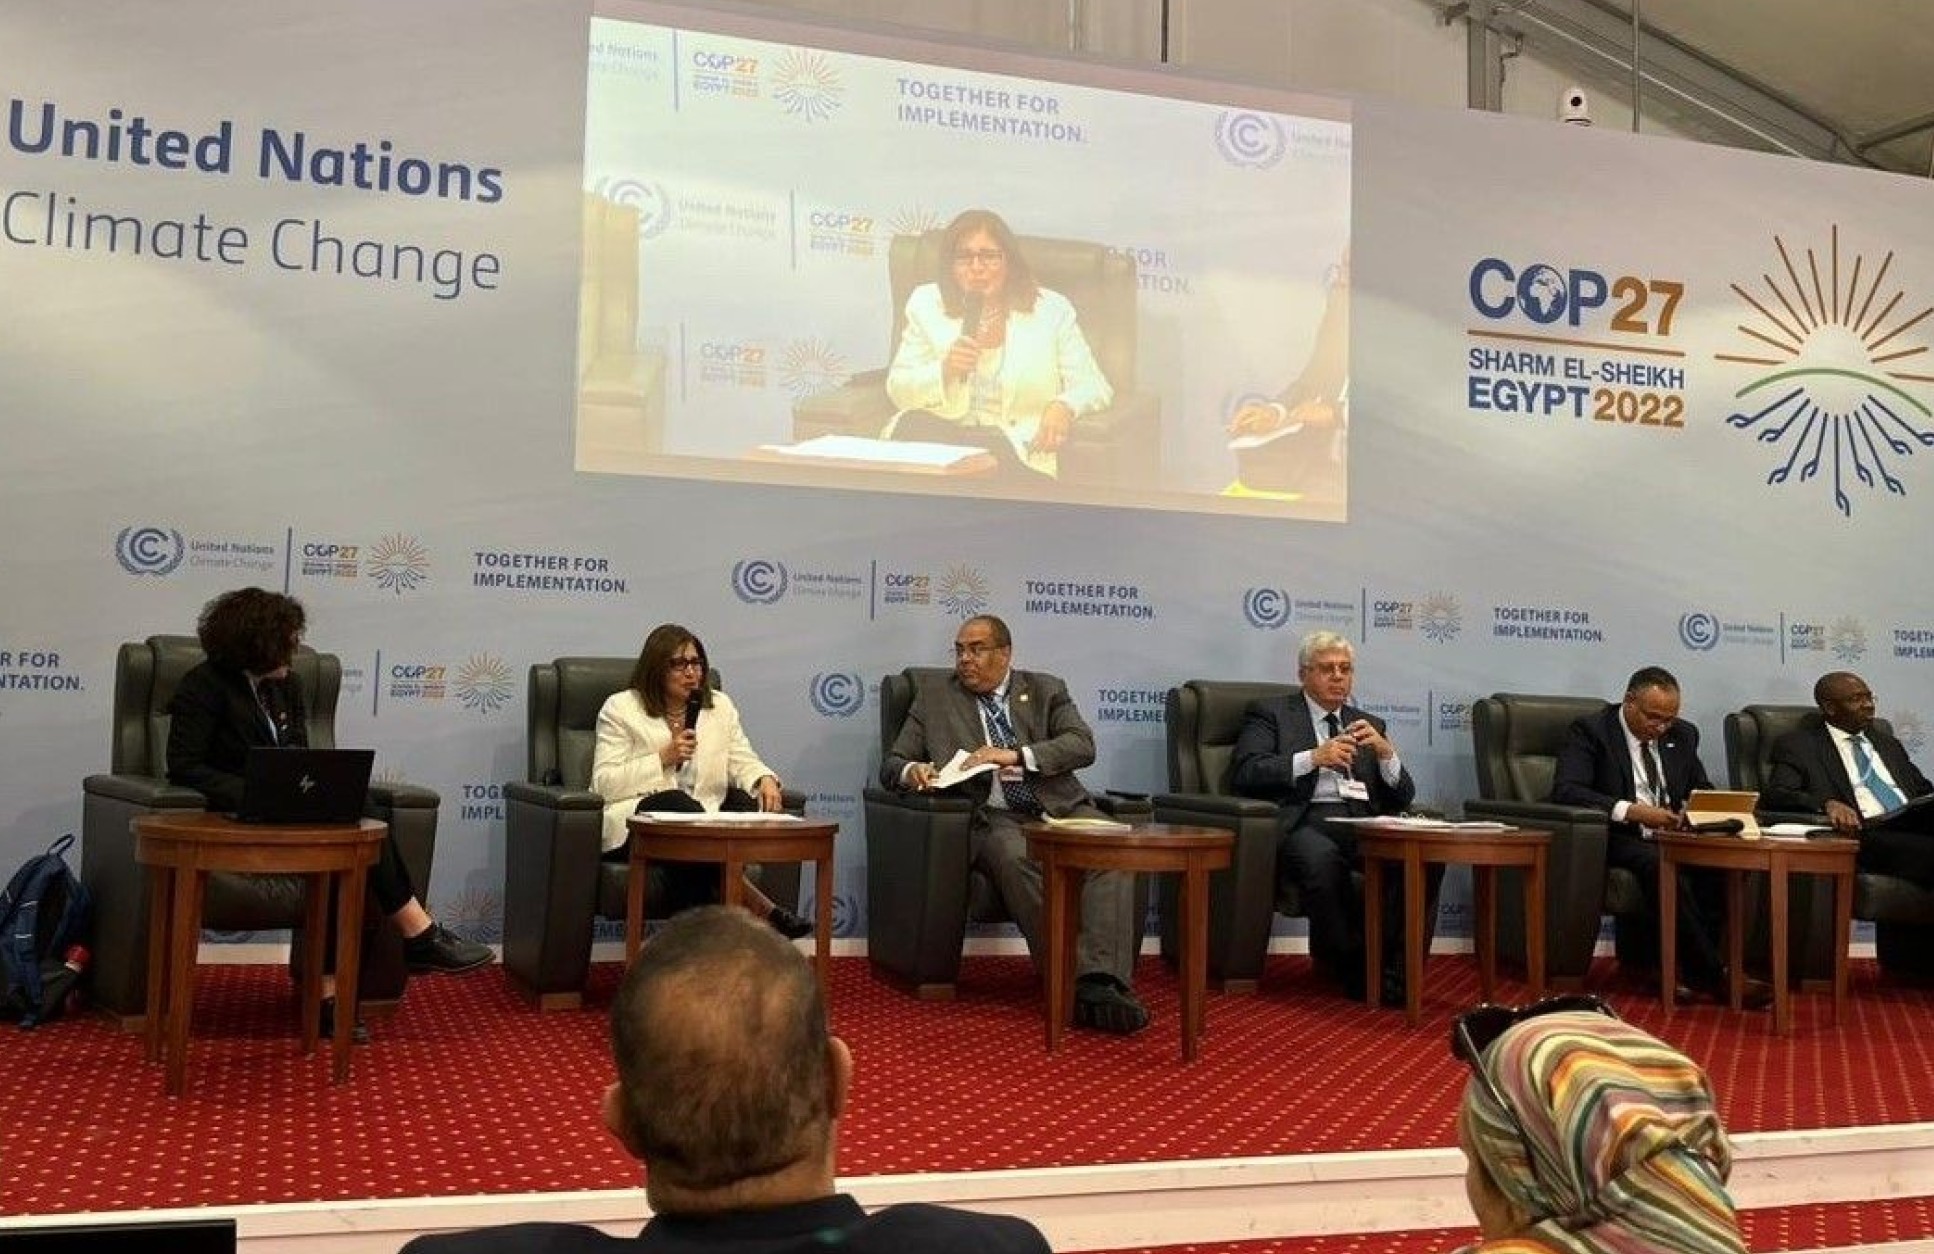 Photo of six people sitting on a stage speaking to an audience, the backdrop says United Nations Climate Change, COP27 Sharm El-Sheikh Egypt 2022